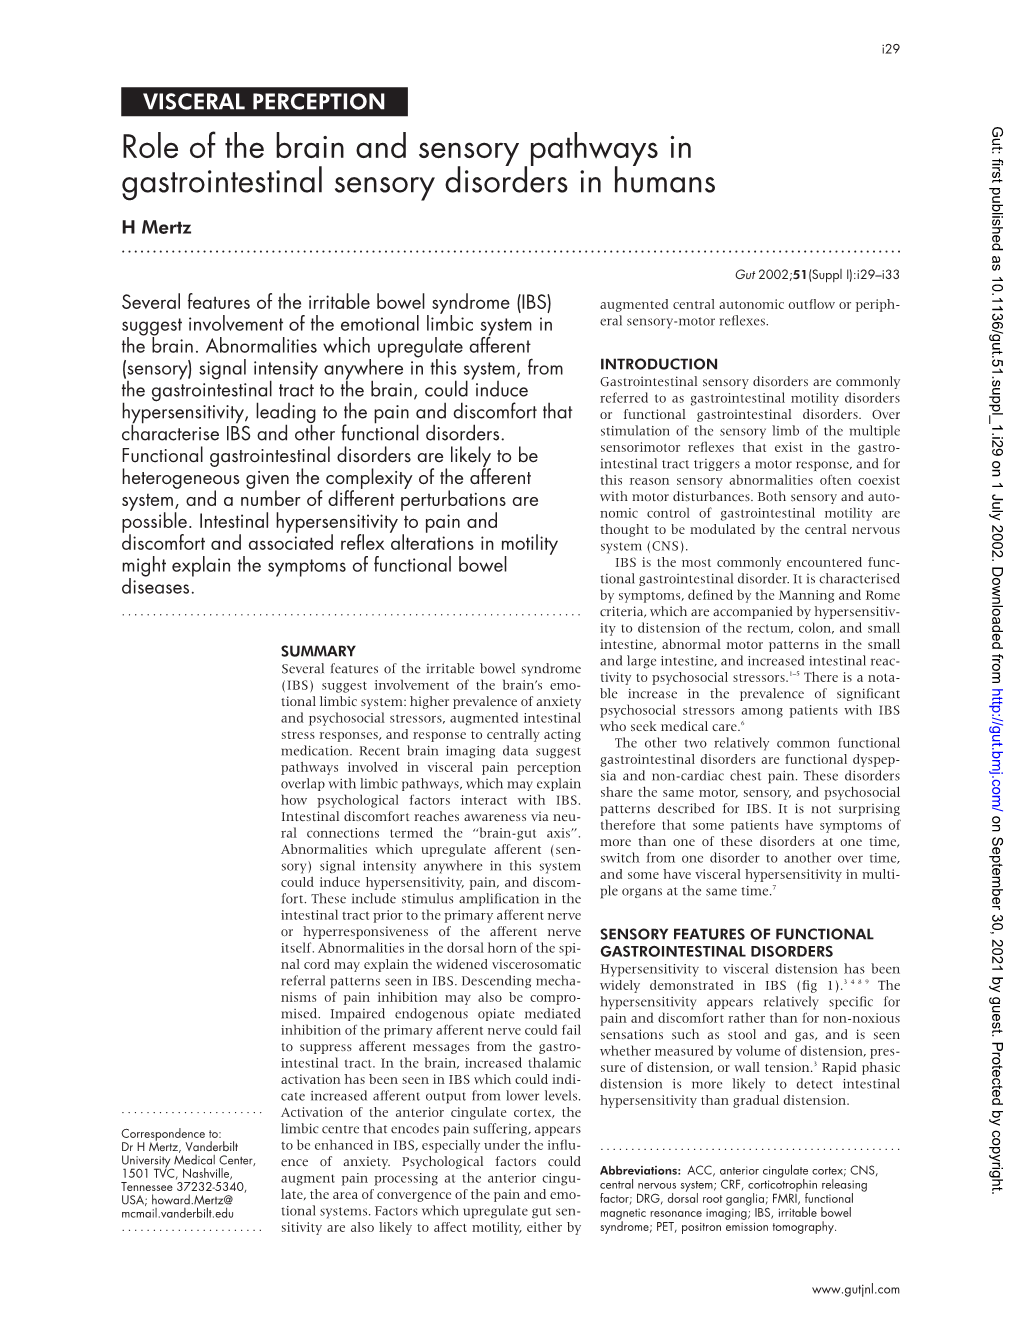 Role of the Brain and Sensory Pathways in Gastrointestinal Sensory Disorders in Humans H Mertz